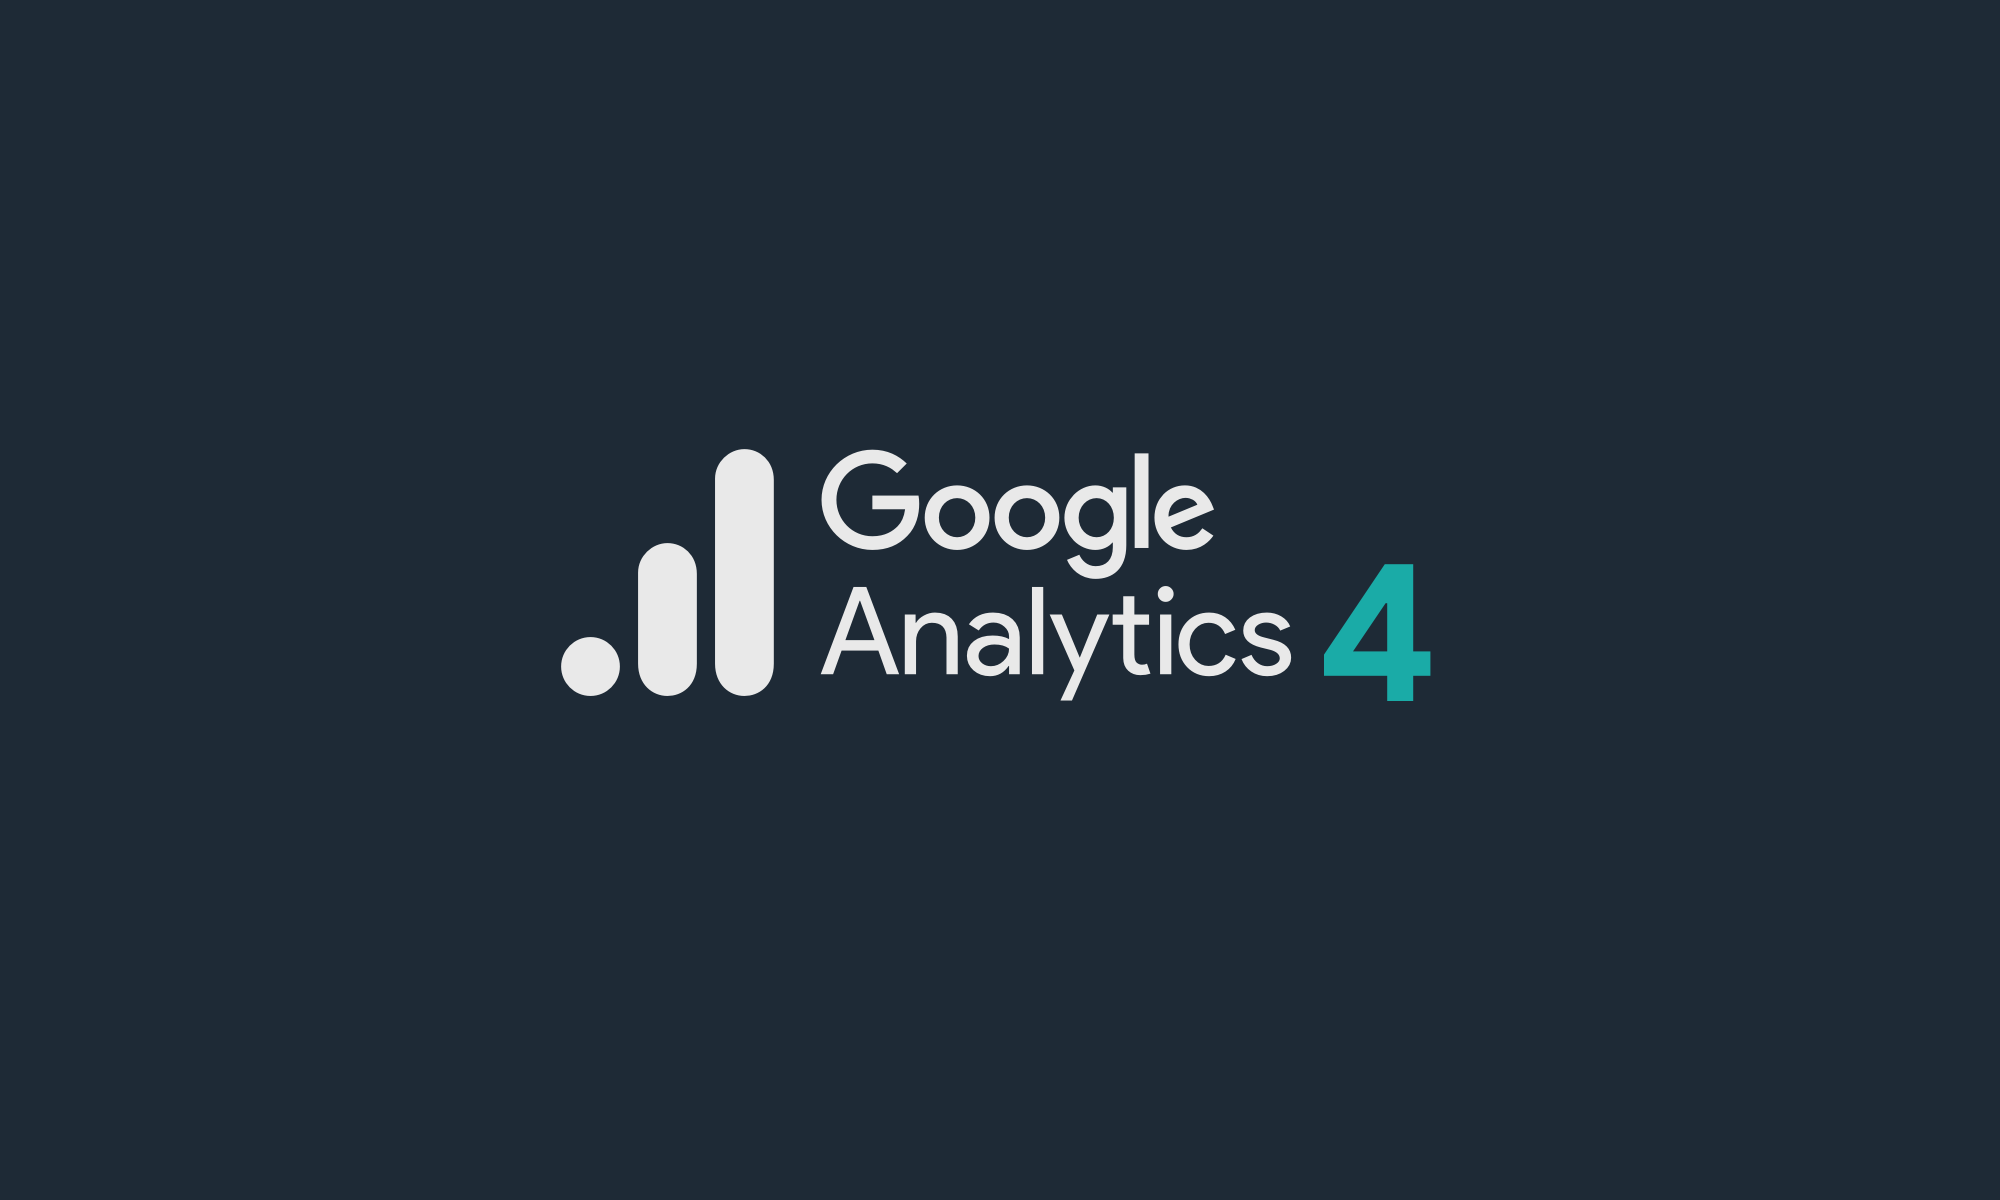 It's Time to Switch to Google Analytics 4